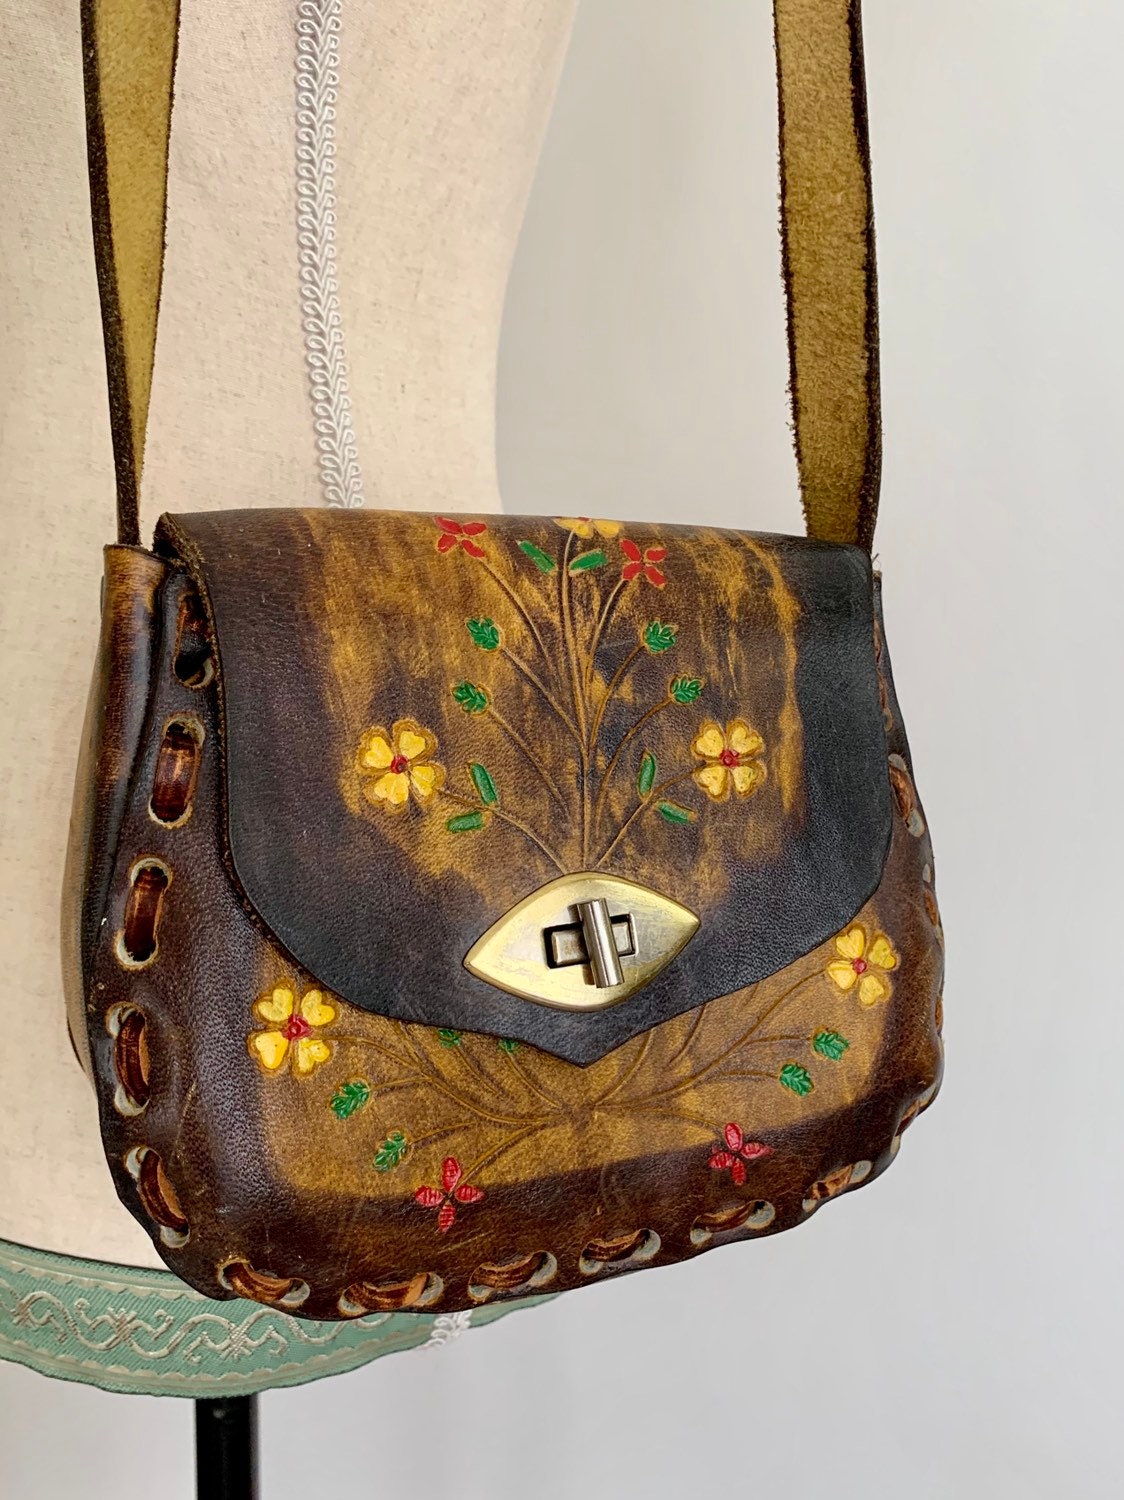 70s Tooled Leather Purse Small Girl Child Size Stitched Details Hand ...